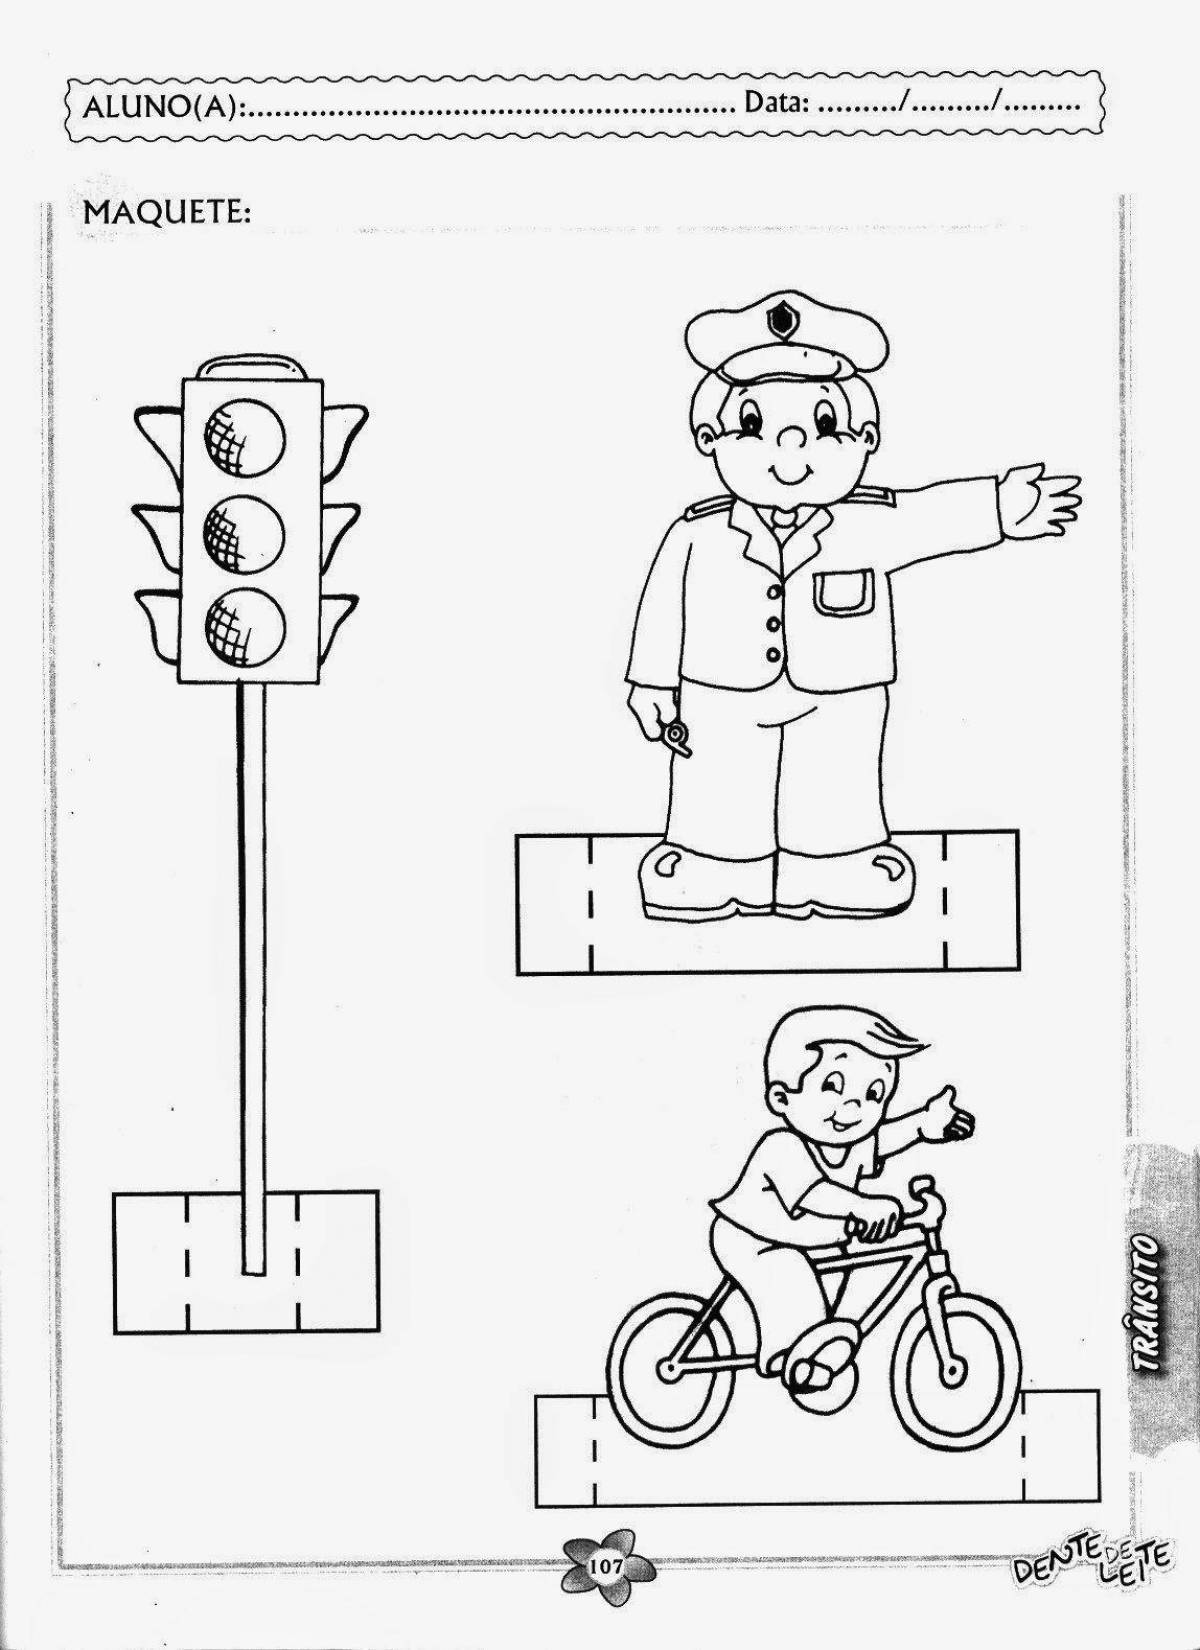 Coloring page interesting rules of the road